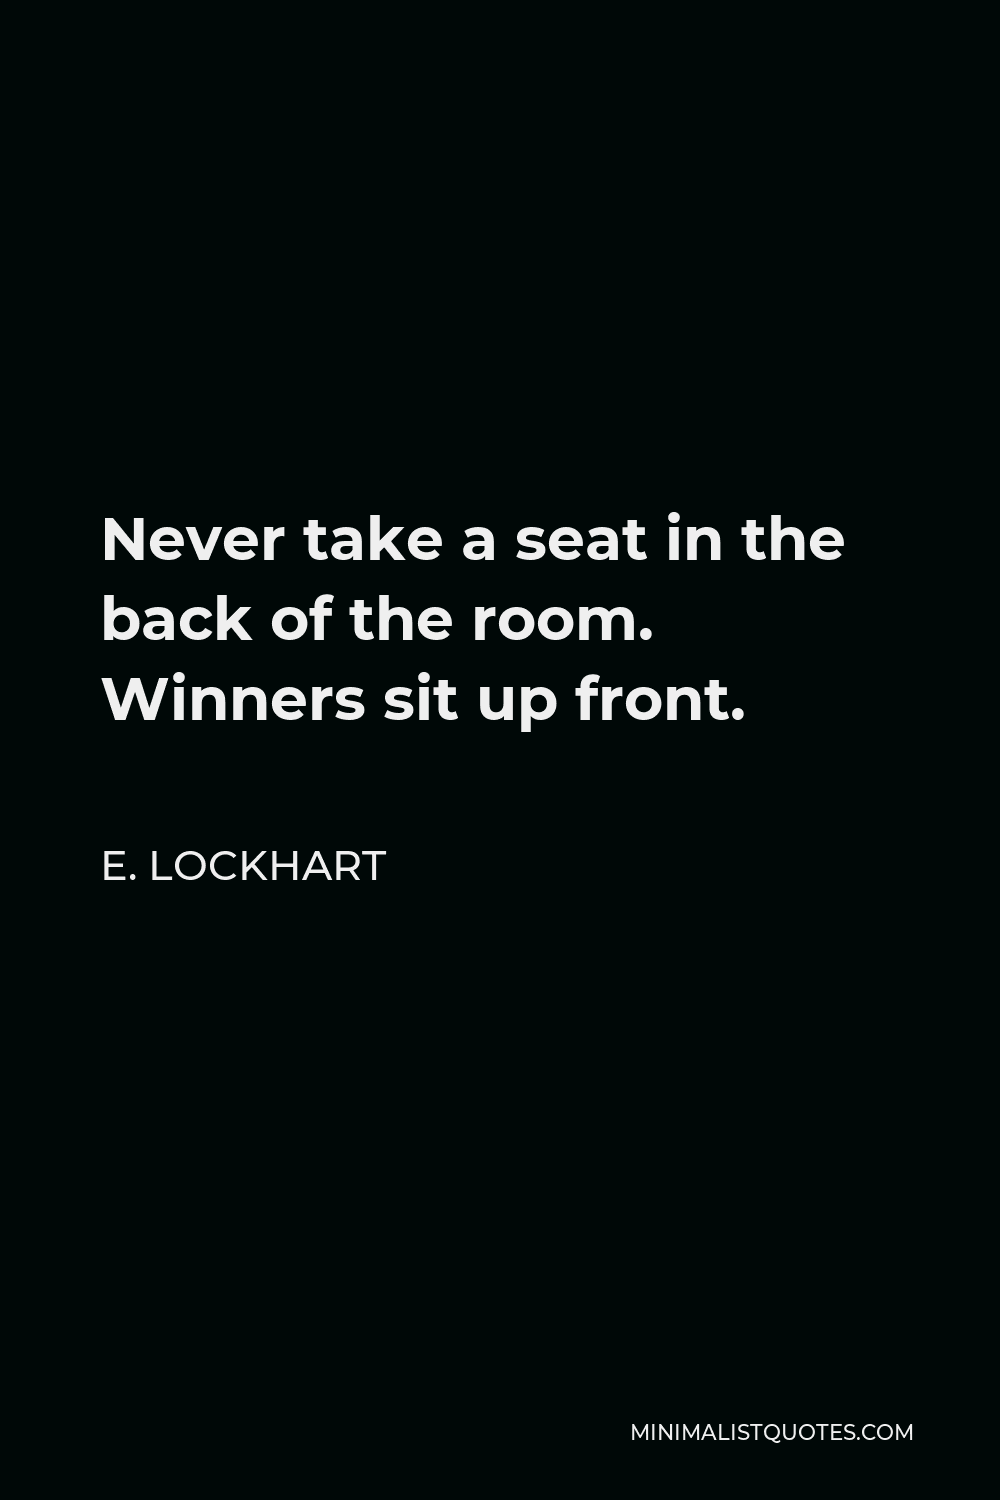 E. Lockhart Quote - Never take a seat in the back of the room. Winners sit up front.